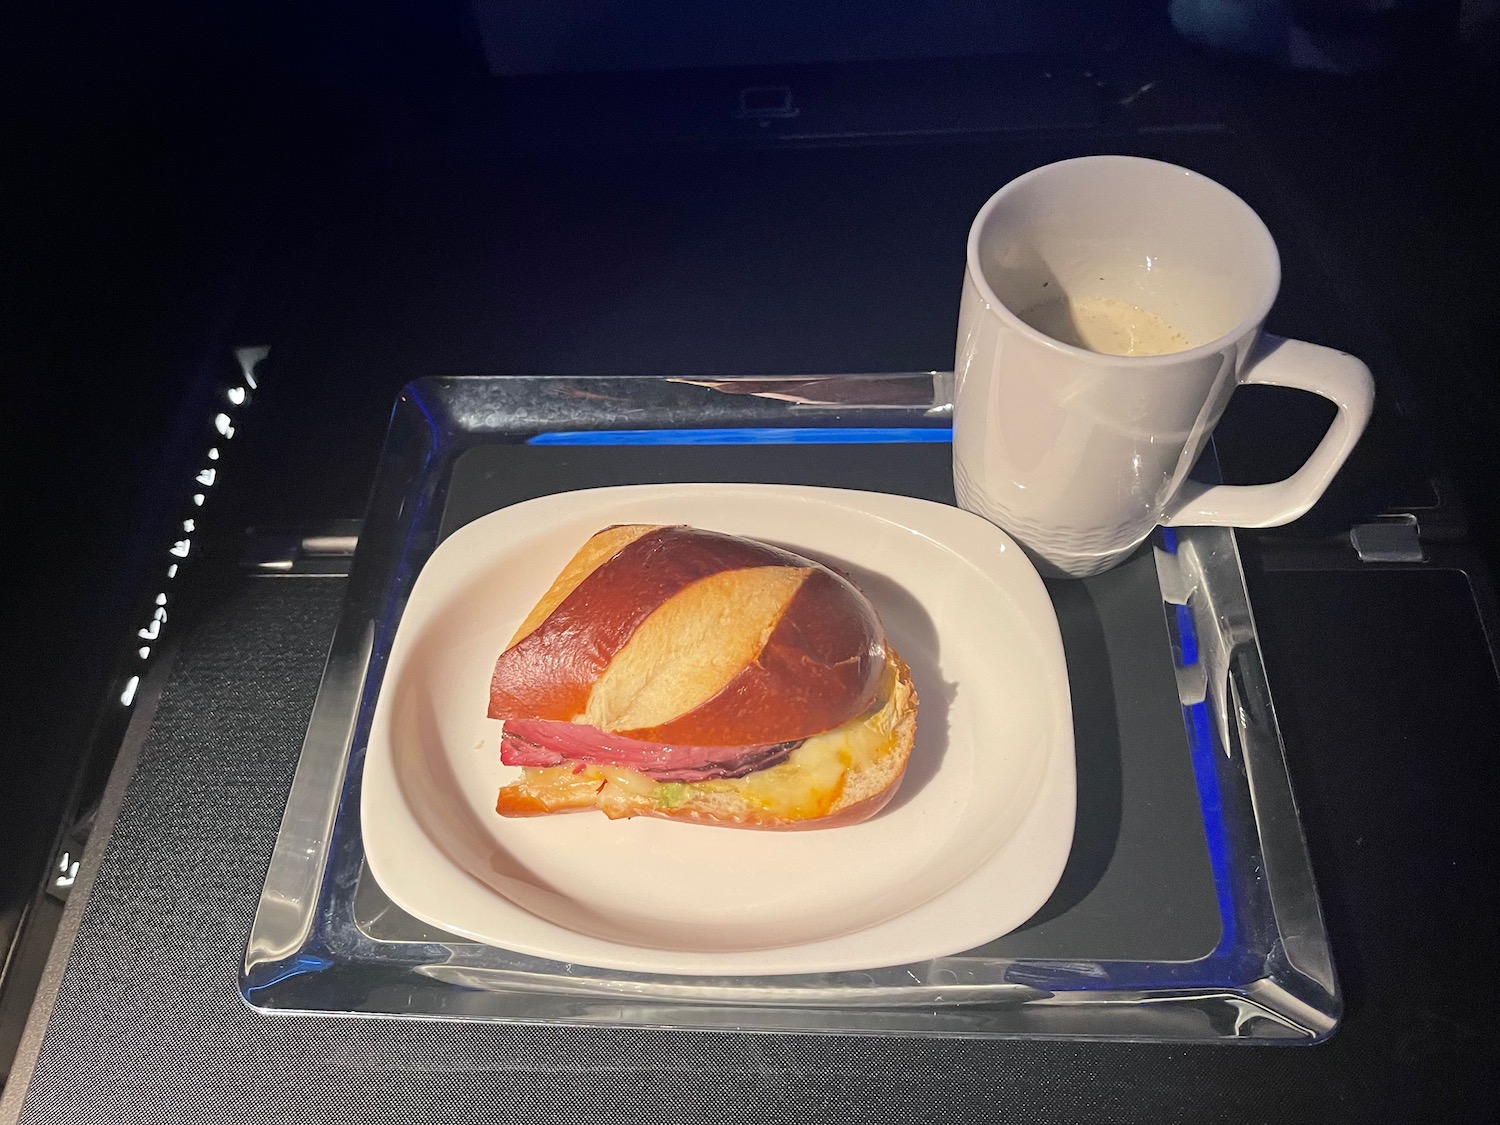 a sandwich and a cup on a tray